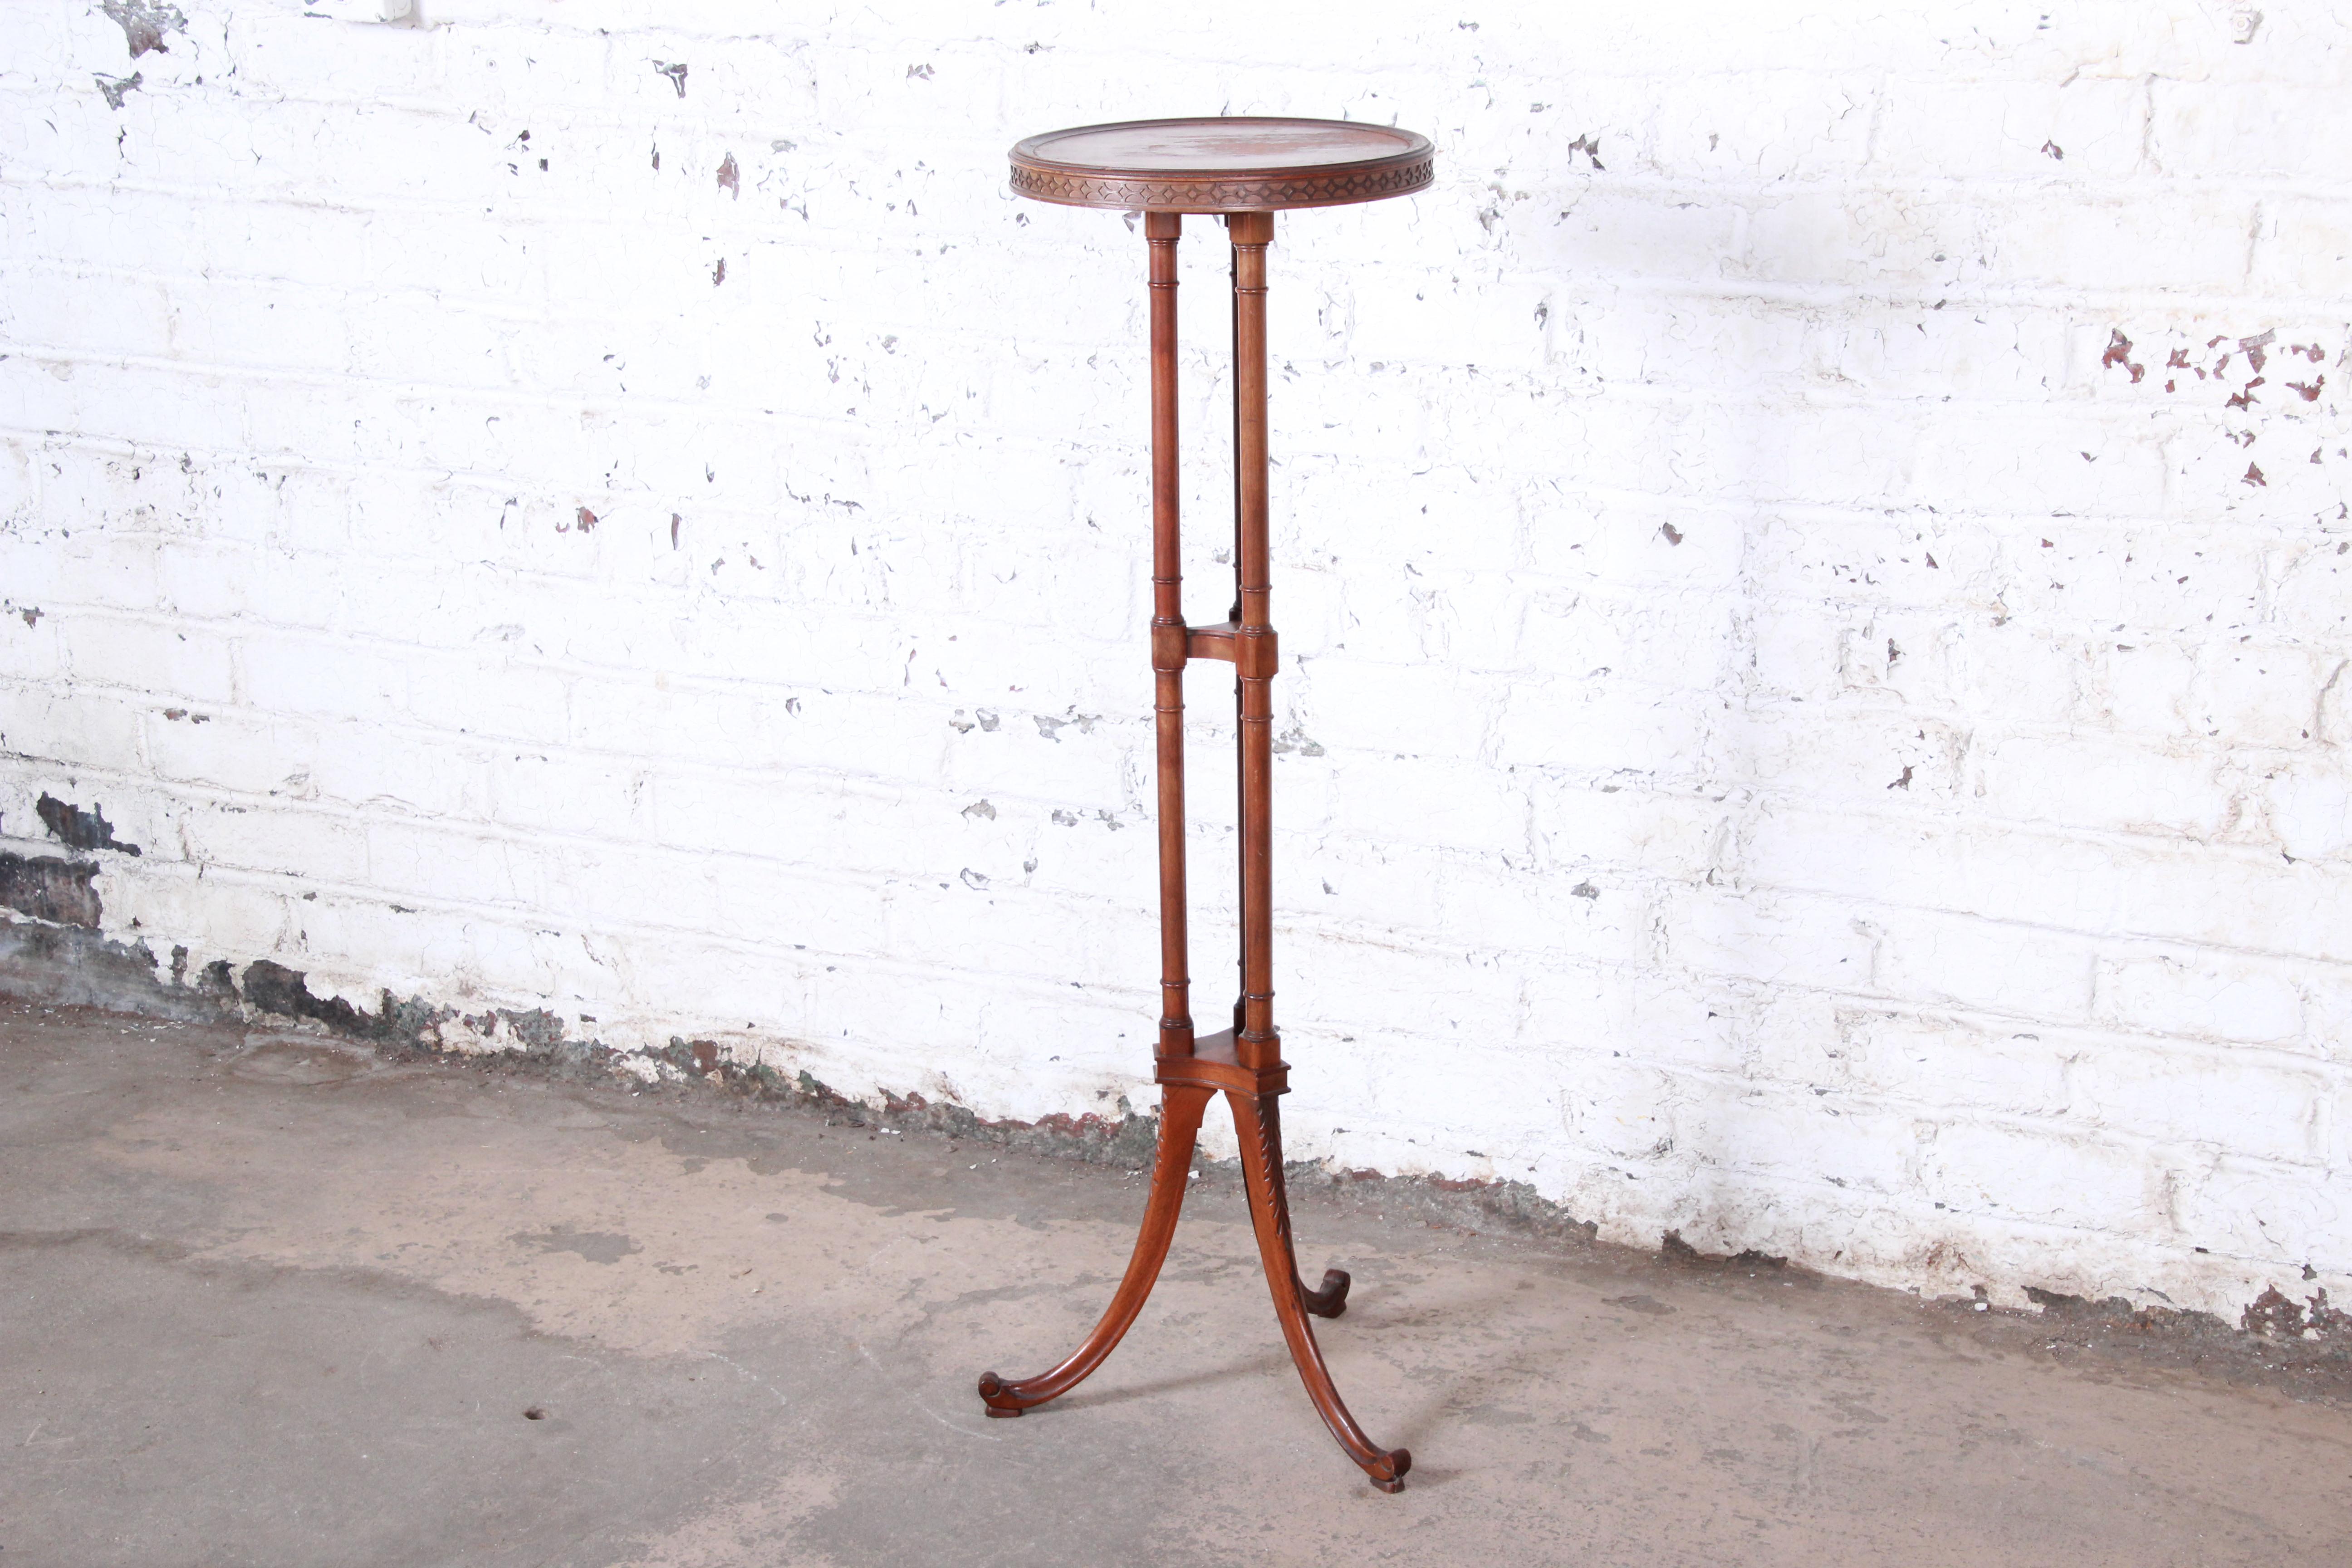 Vintage Chippendale style carved mahogany faux bamboo pedestal plant stand

Attributed to Baker Furniture

USA, circa 1970s

Measures: 14.13